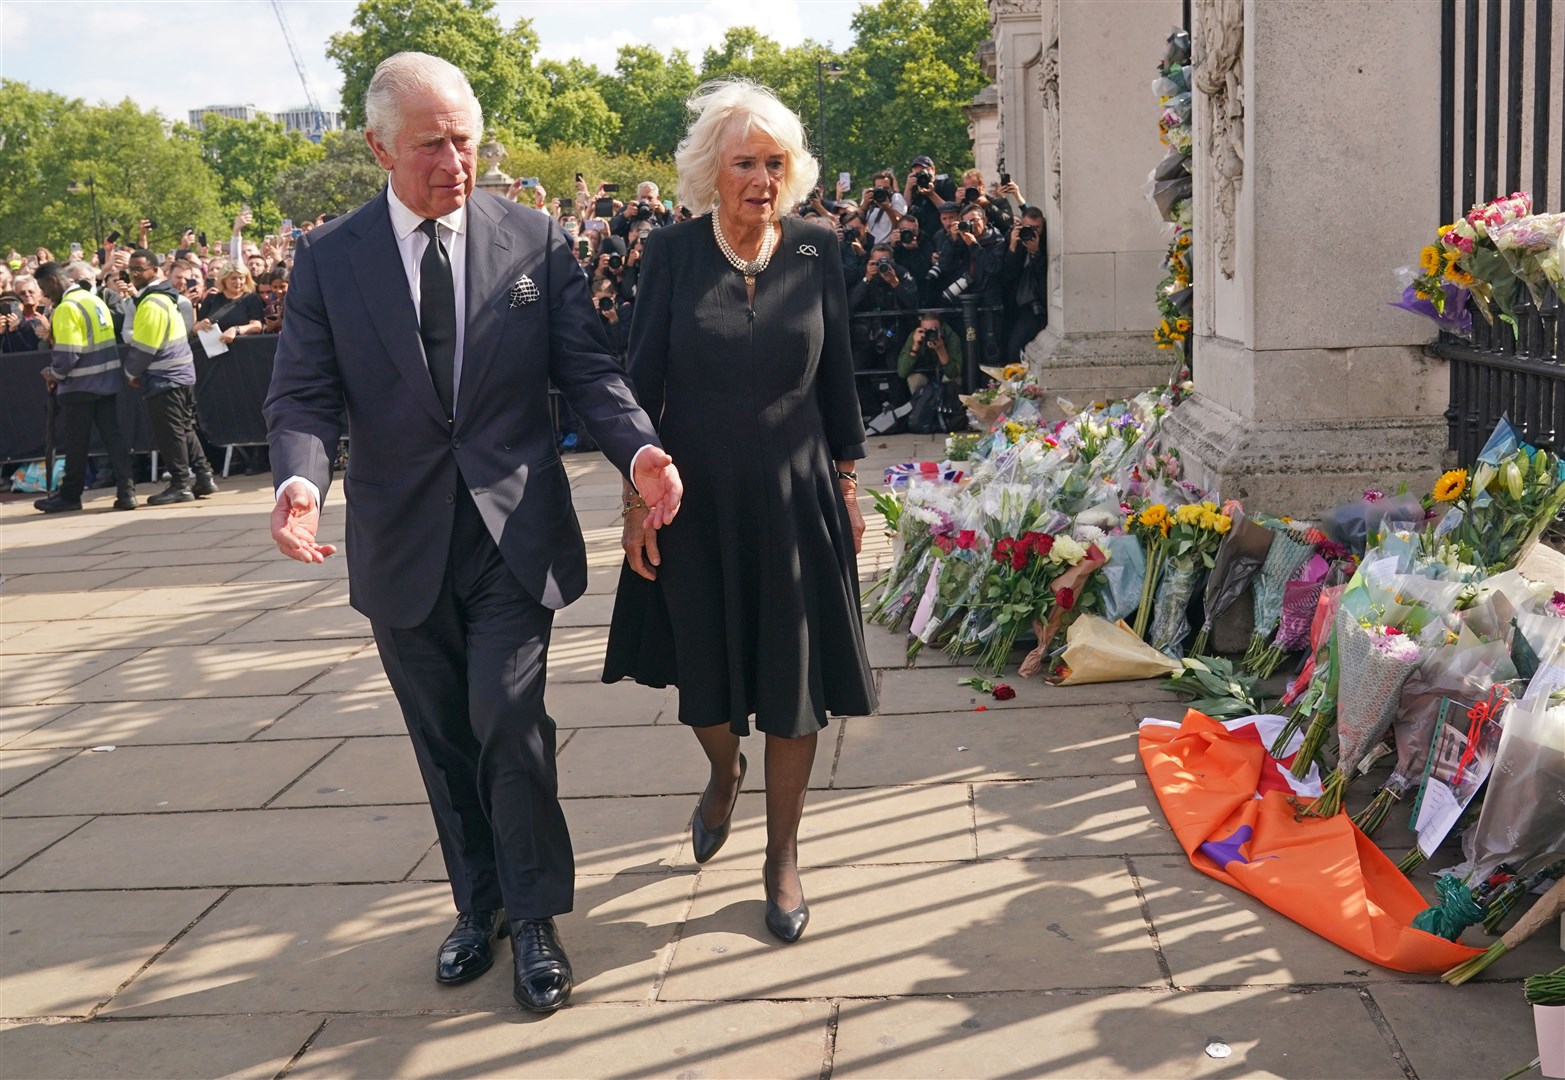 Camilla was by the King’s side as he viewed tributes to his late mother, the Queen, outside Buckingham Palace on Friday (Yui Mok/PA)